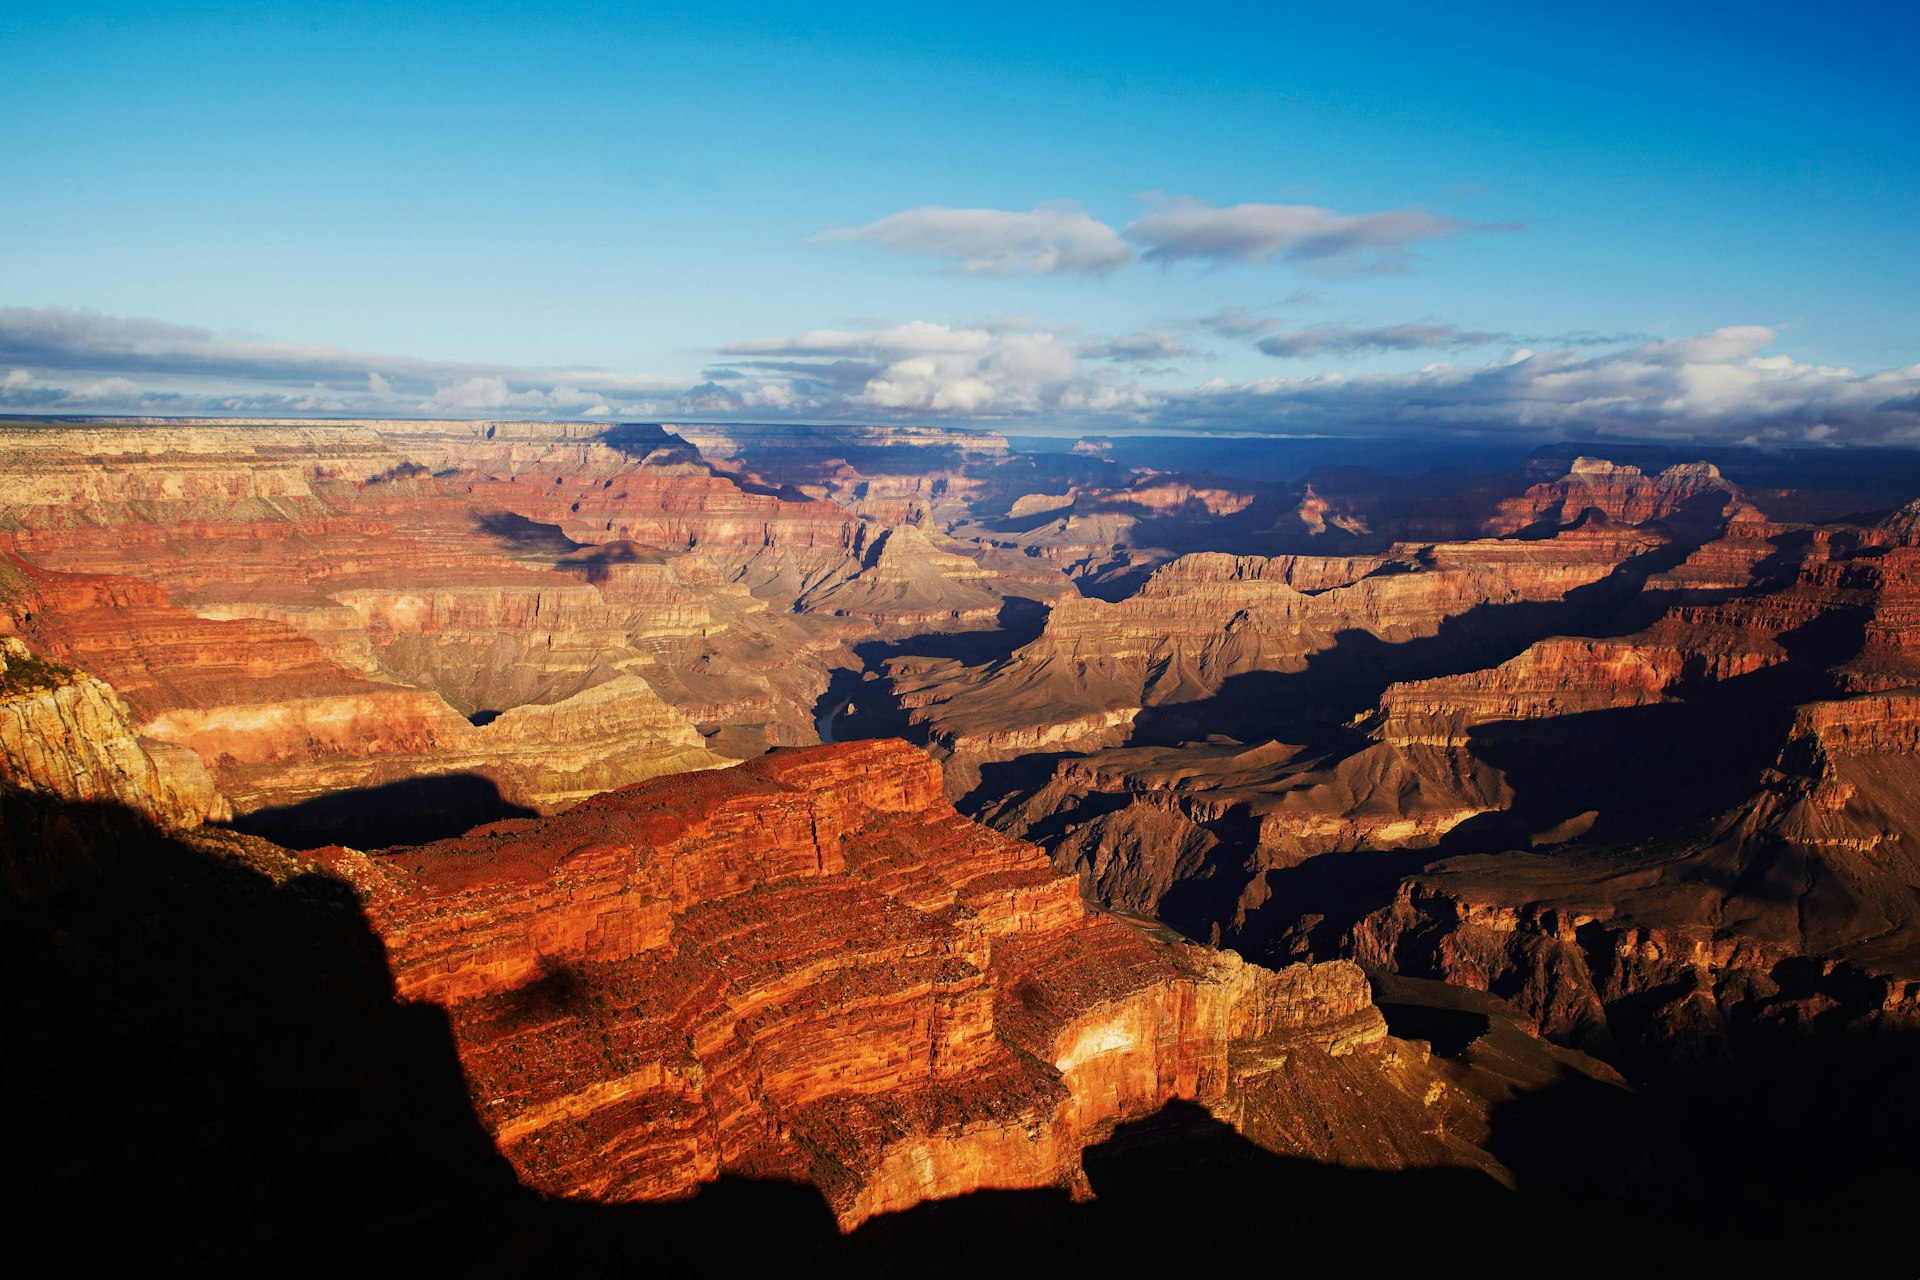 Overview of Grand Canyon seen from South Rim. Image by Mark Read / Lonely Planet